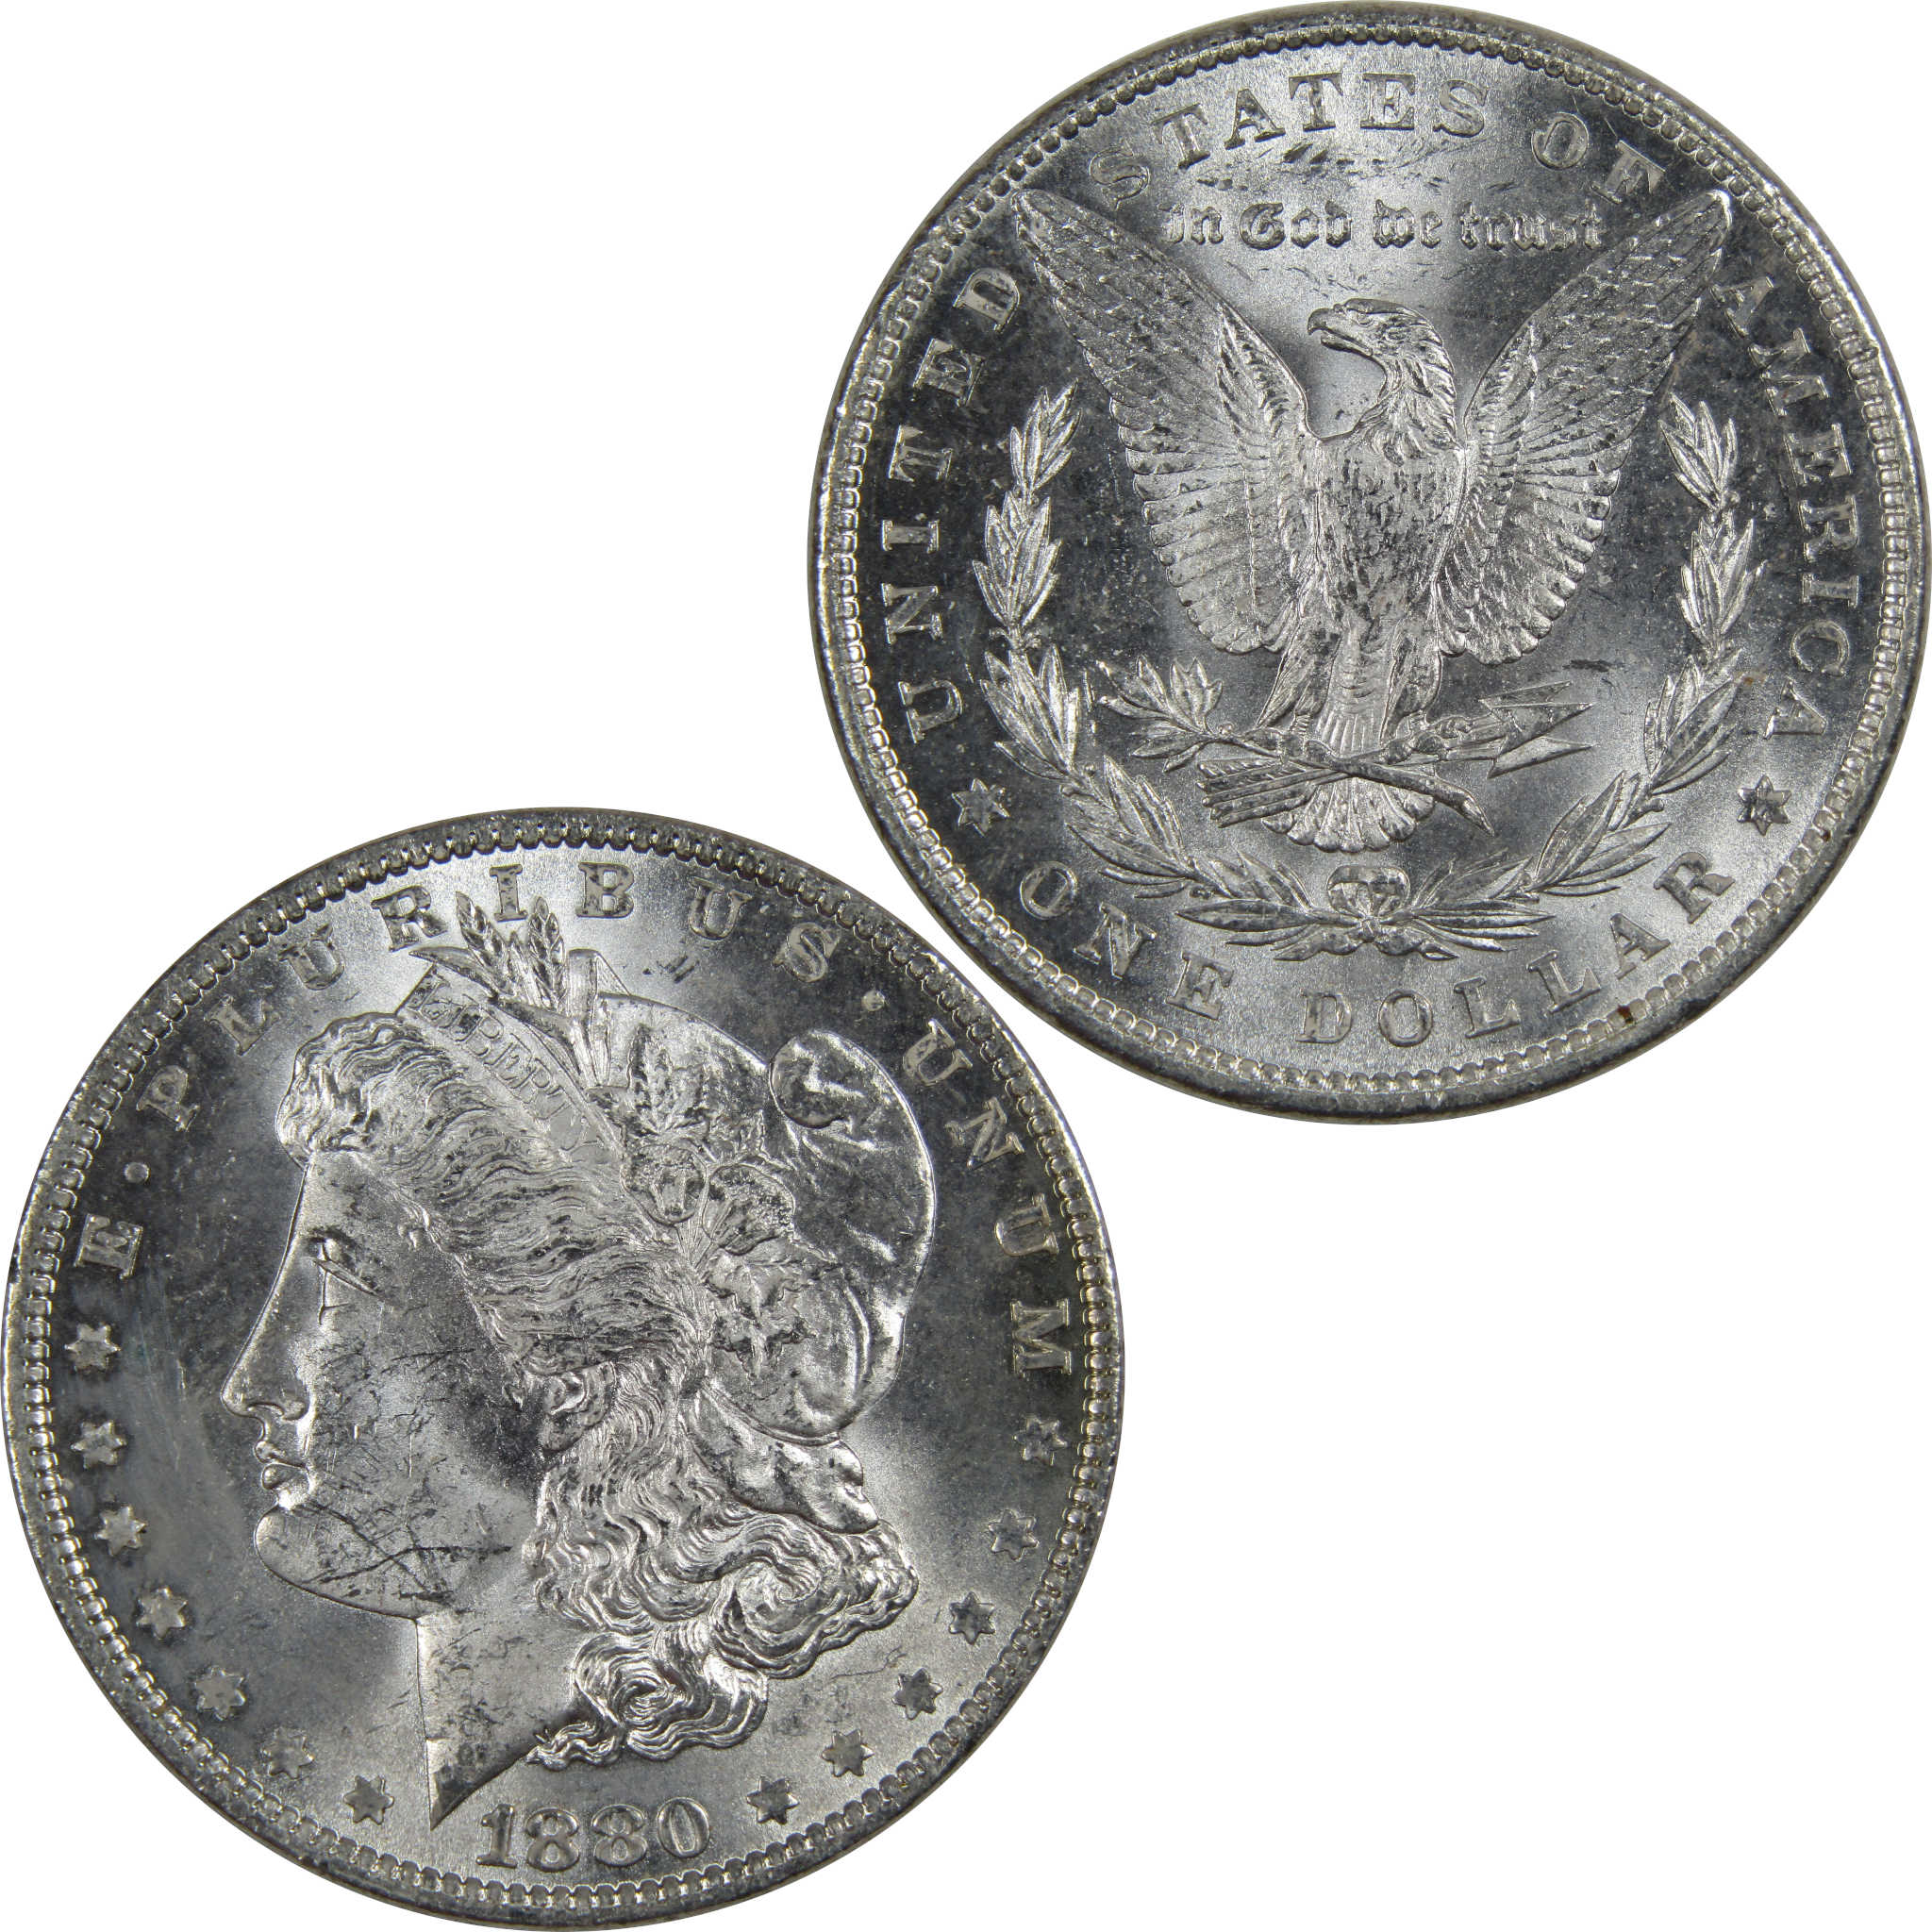 1880 Morgan Dollar BU Uncirculated Mint State 90% Silver SKU:I192 - Morgan coin - Morgan silver dollar - Morgan silver dollar for sale - Profile Coins &amp; Collectibles